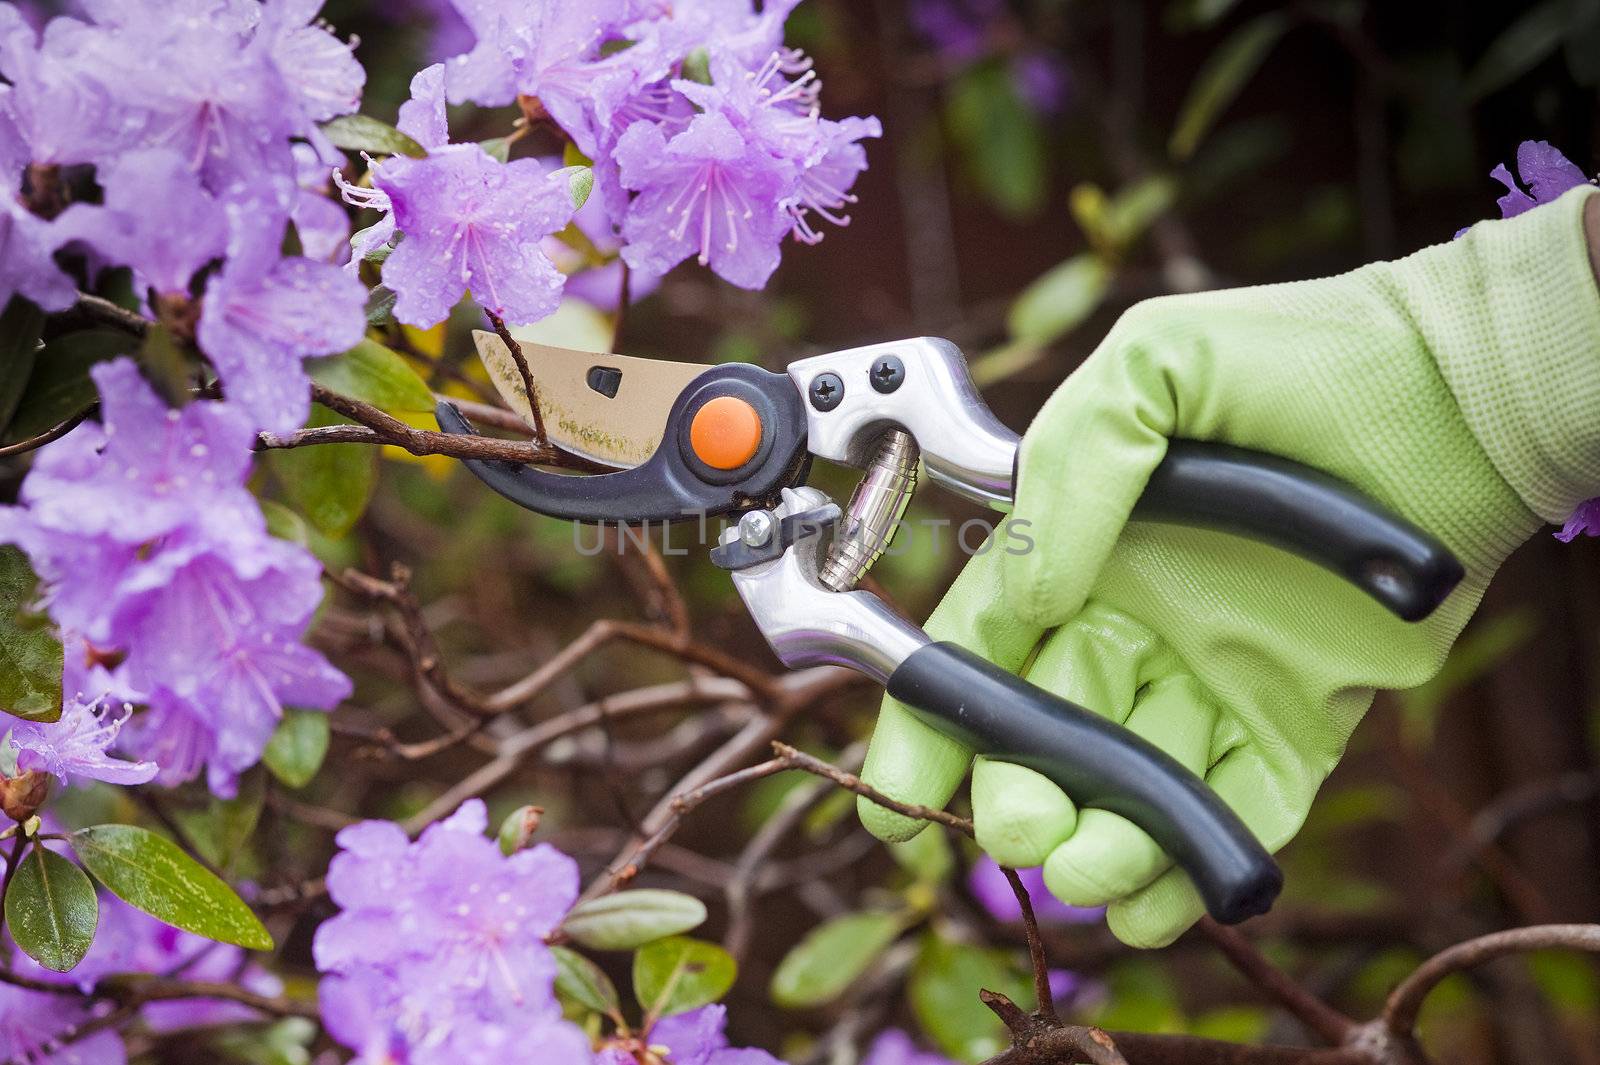 Pruners used to trim flowering shrub in the spring pruning shrubs with sharp pruners